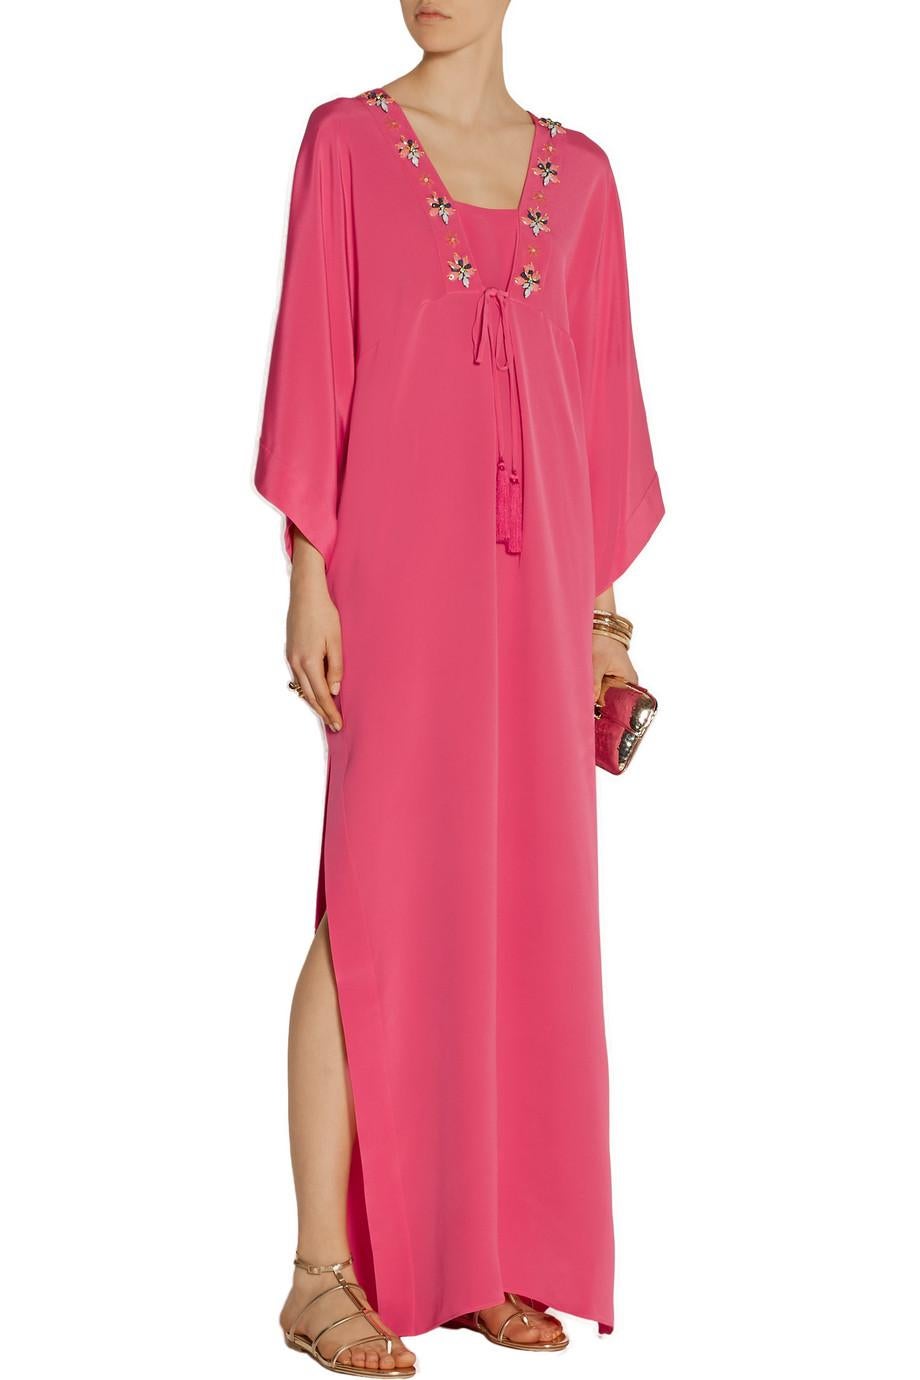 NEW Emilio Pucci Silk Cady Embroidered Kaftan Maxi Dress Evening Gown 42 For Sale 8